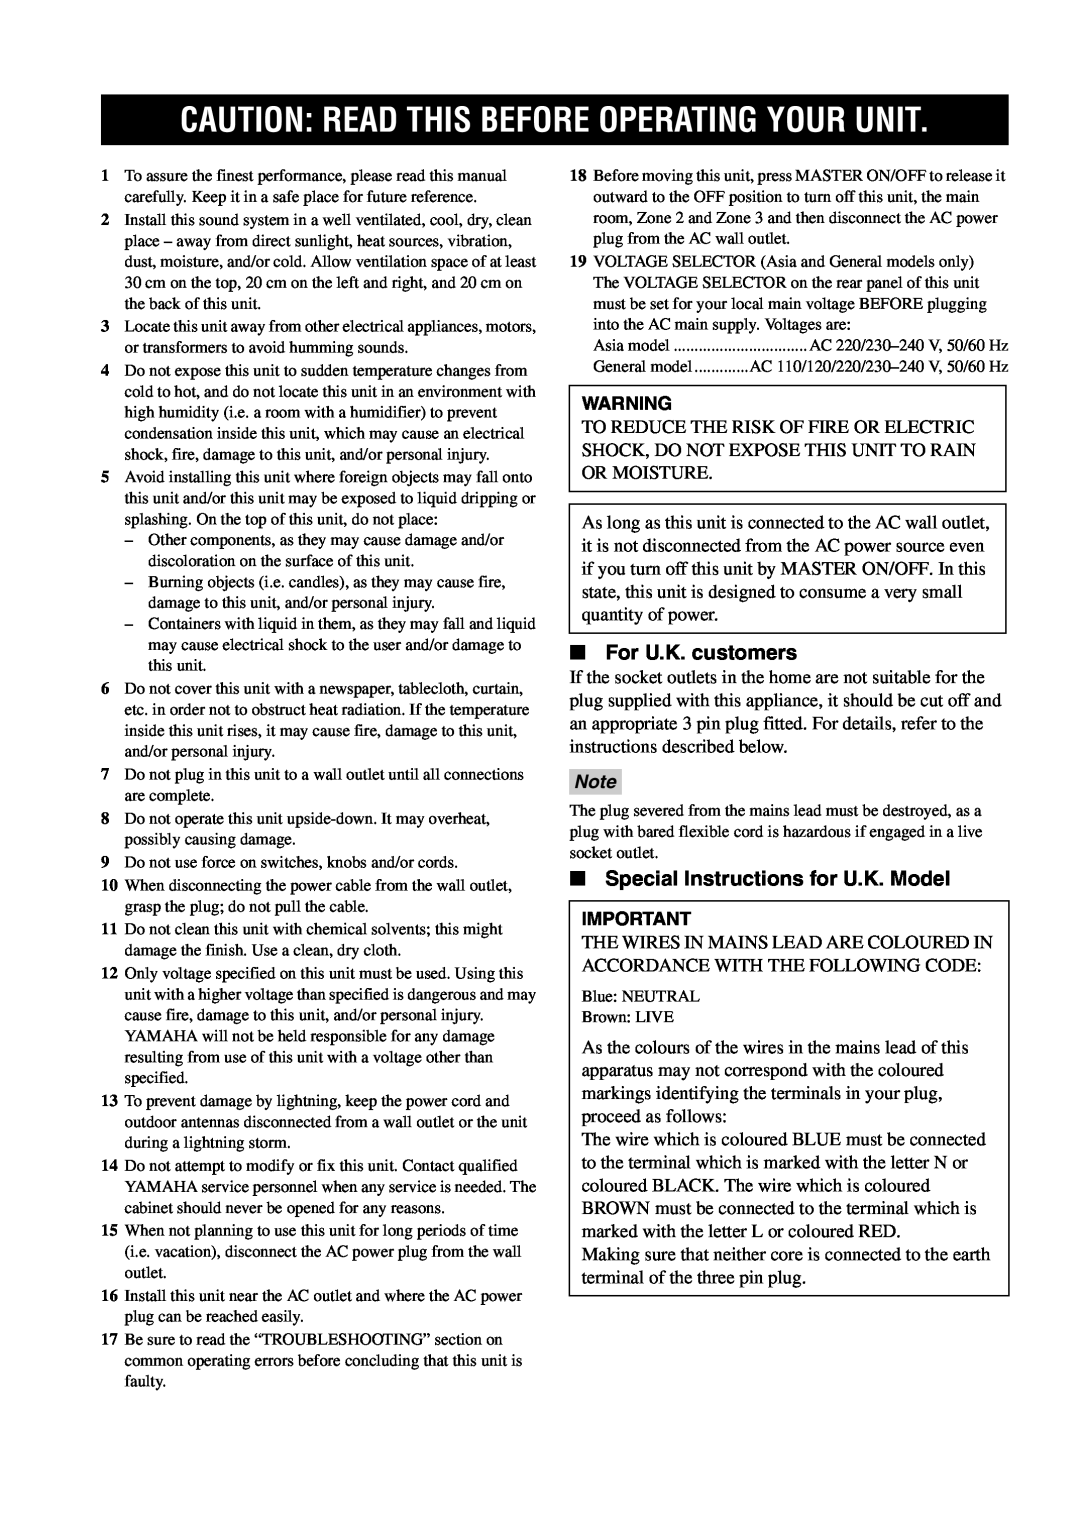 Yamaha RX-V1600 Caution: Read This Before Operating Your Unit, For U.K. customers, Special Instructions for U.K. Model 